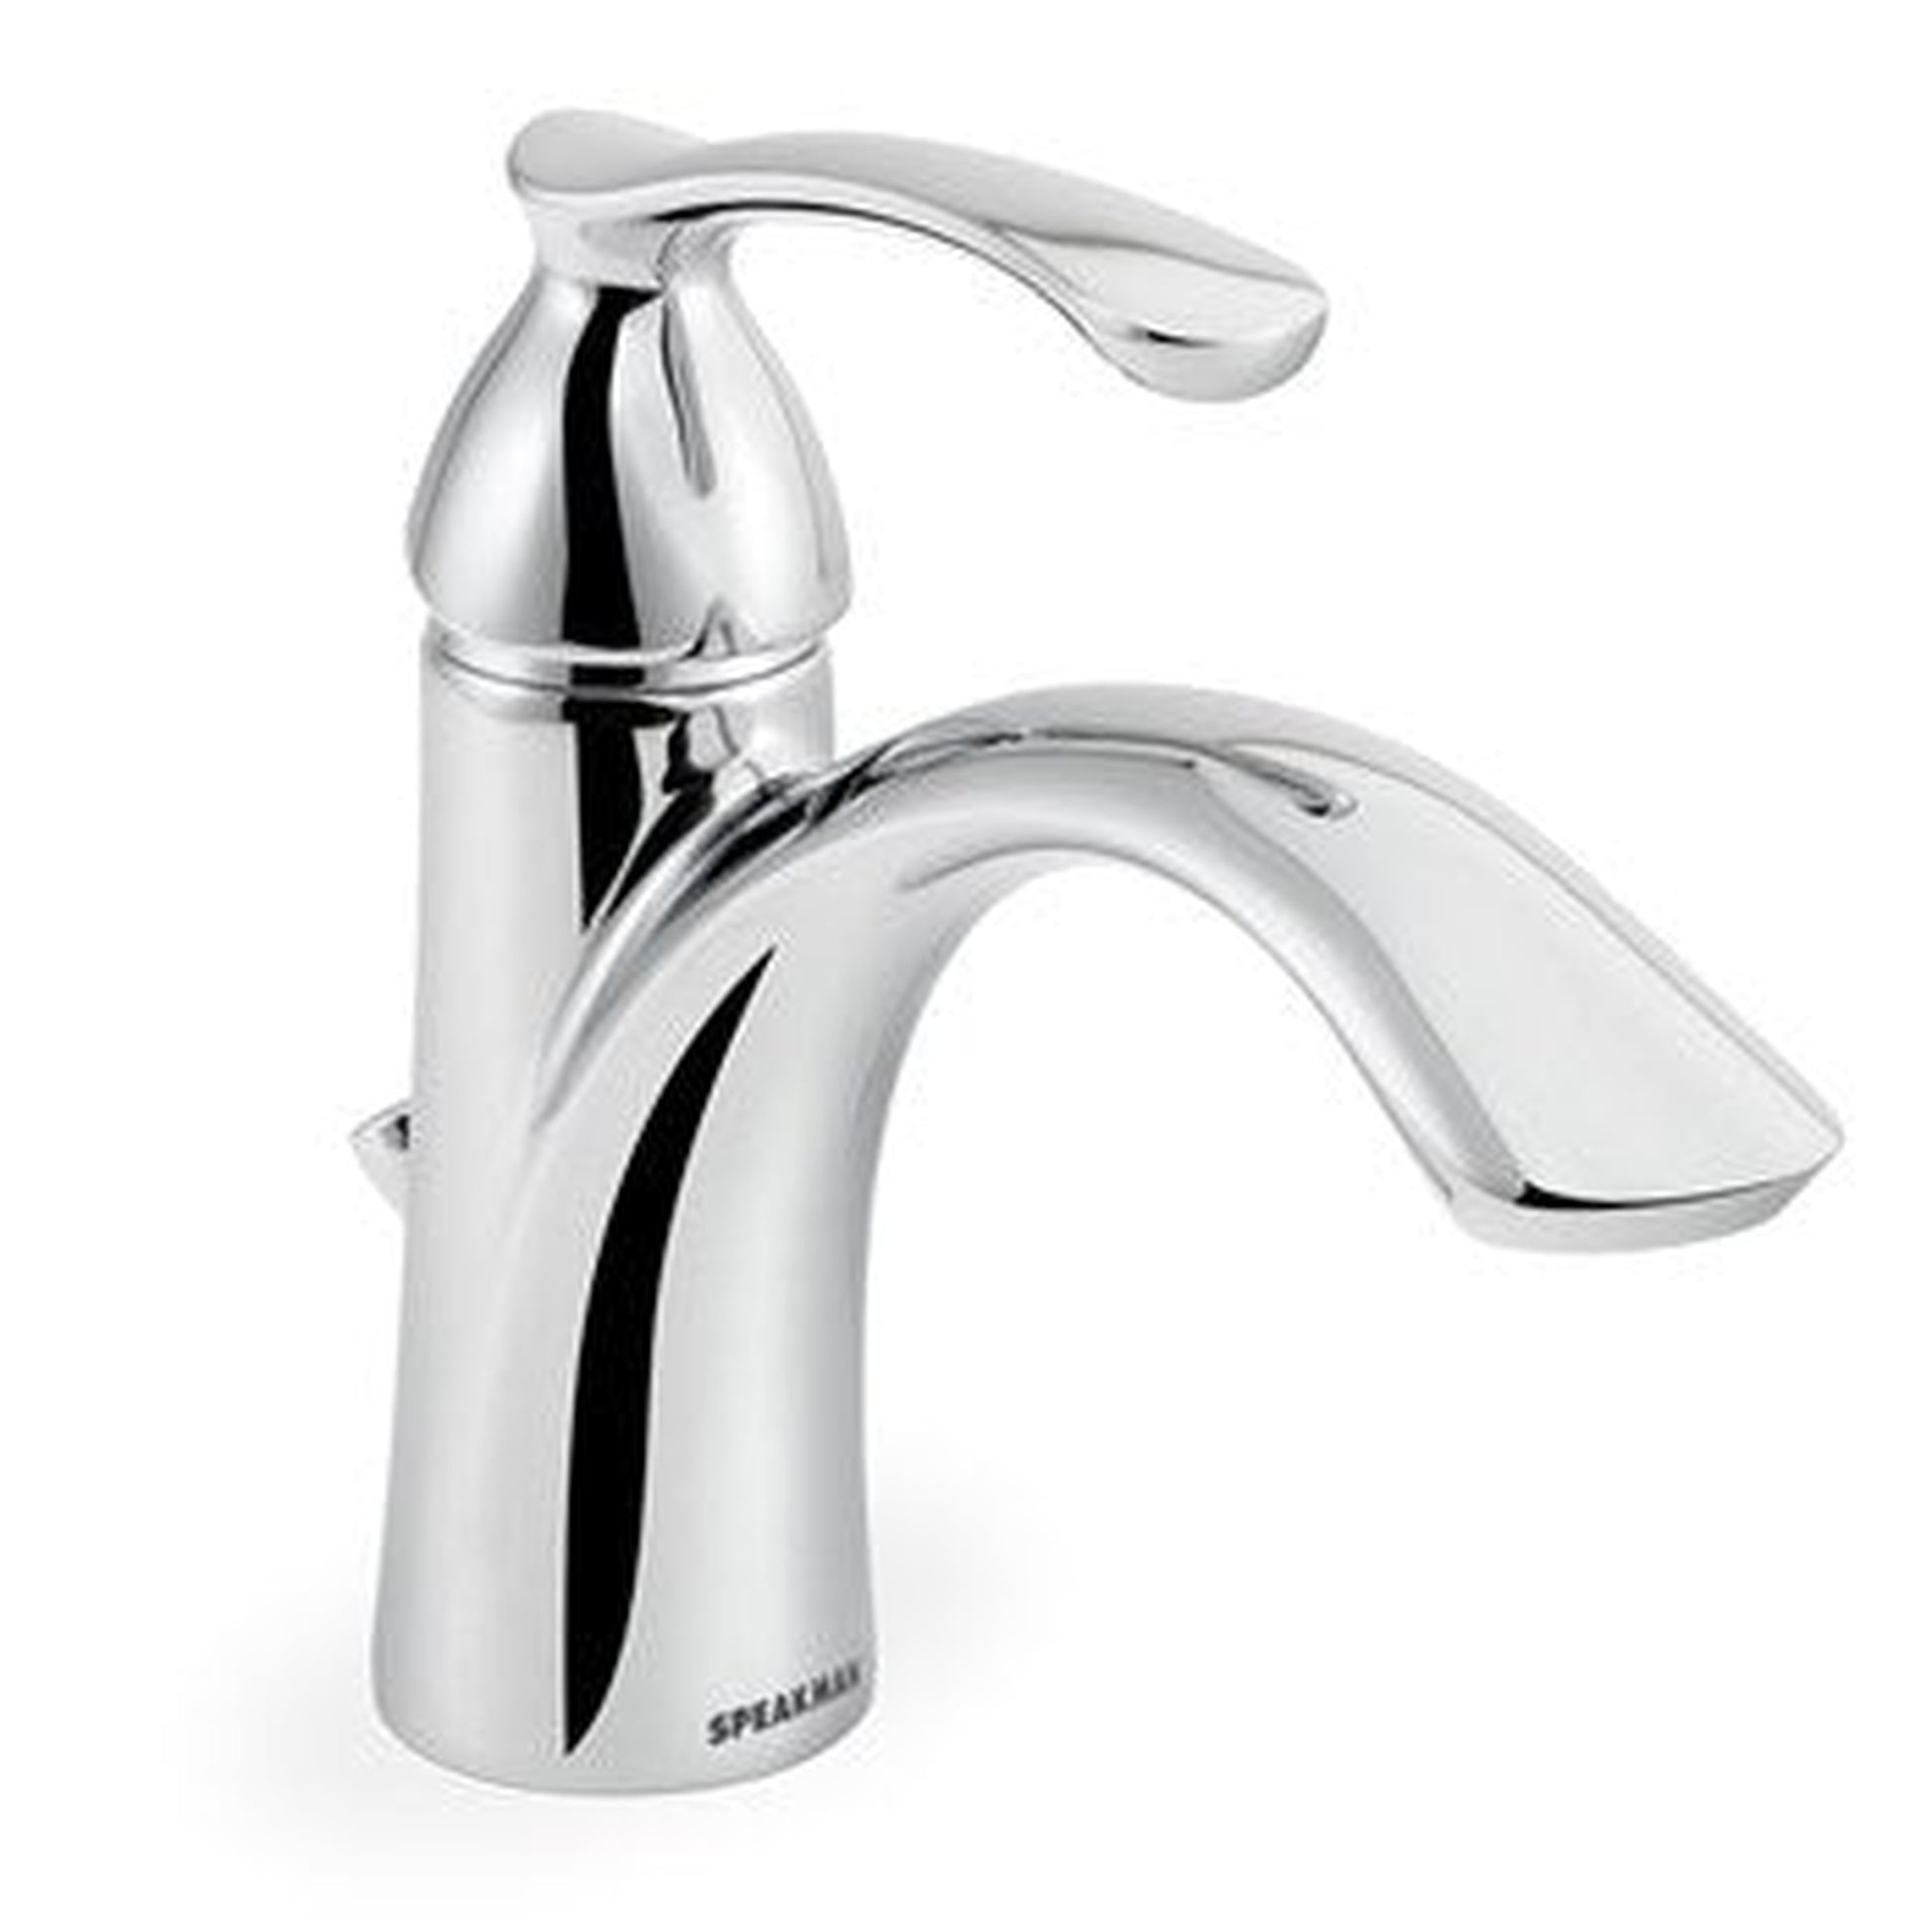 Speakman Chelsea Polished Chrome 1.2 GPM Single Lever Faucet